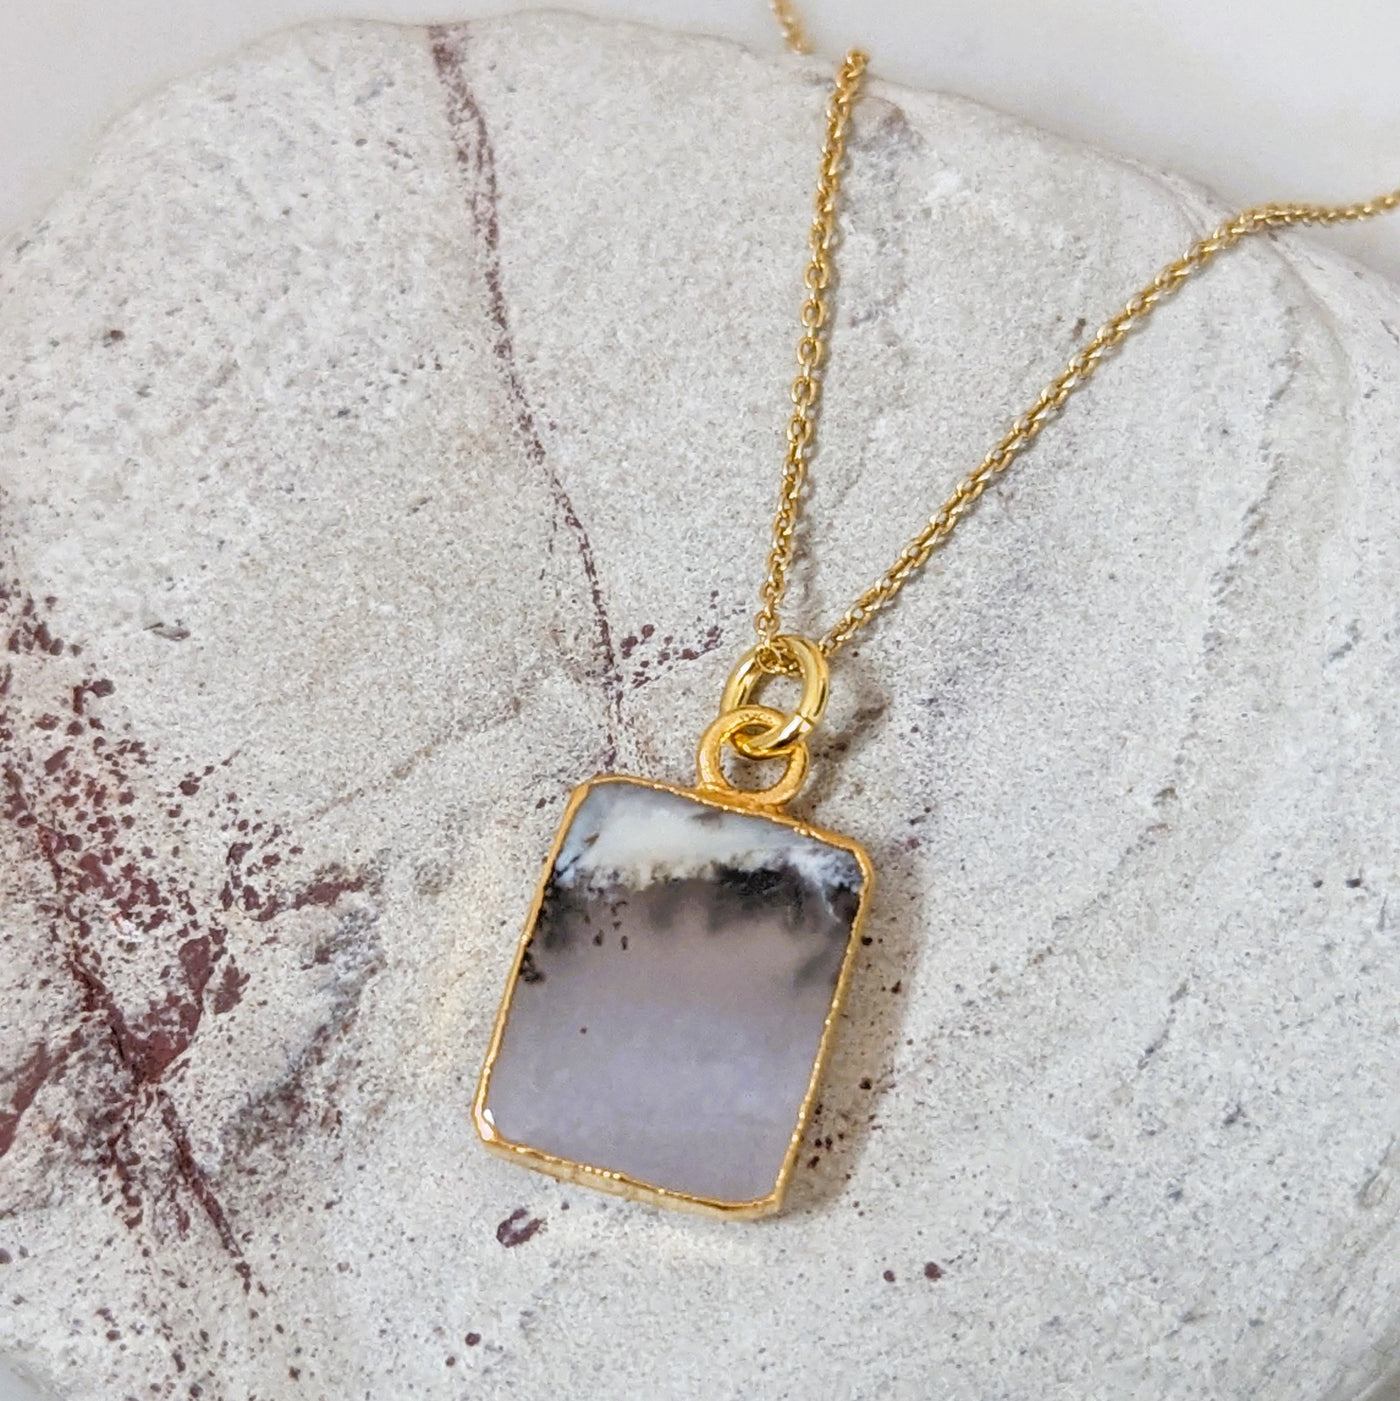 The Rectangle Dendritic Agate Gemstone Necklace - 18ct Gold Plated